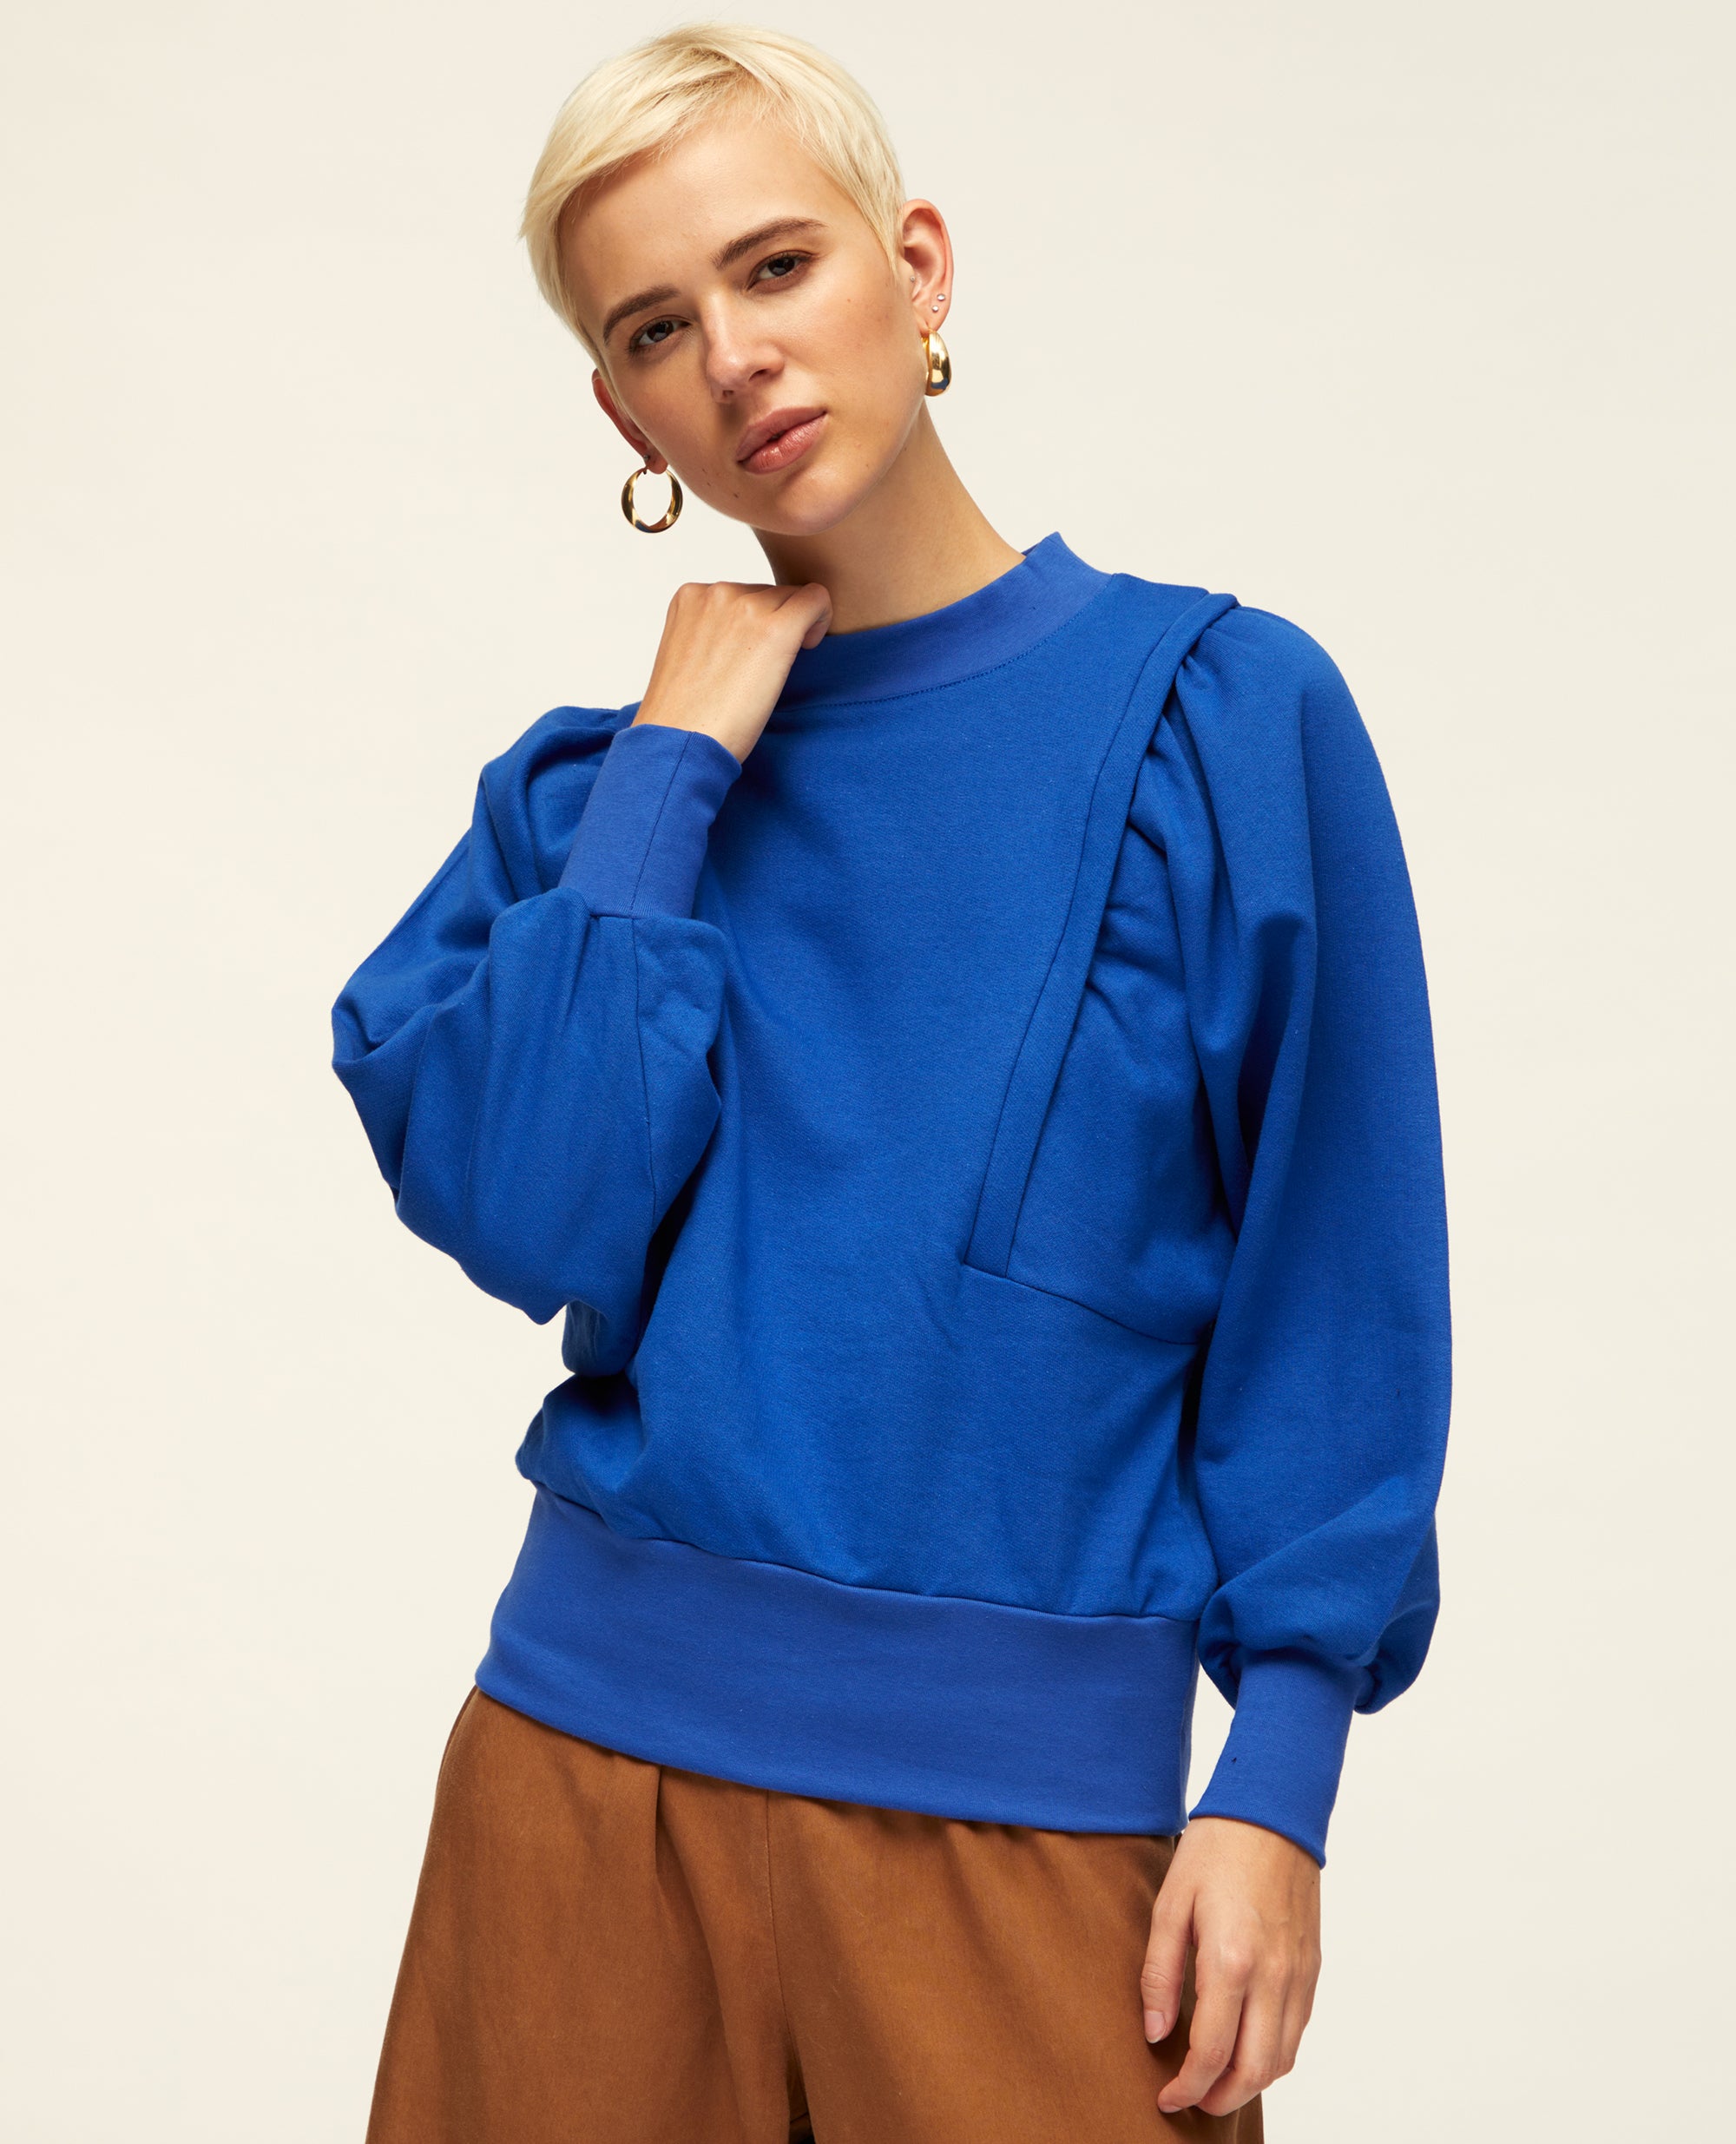 Yumi | Panelled Top